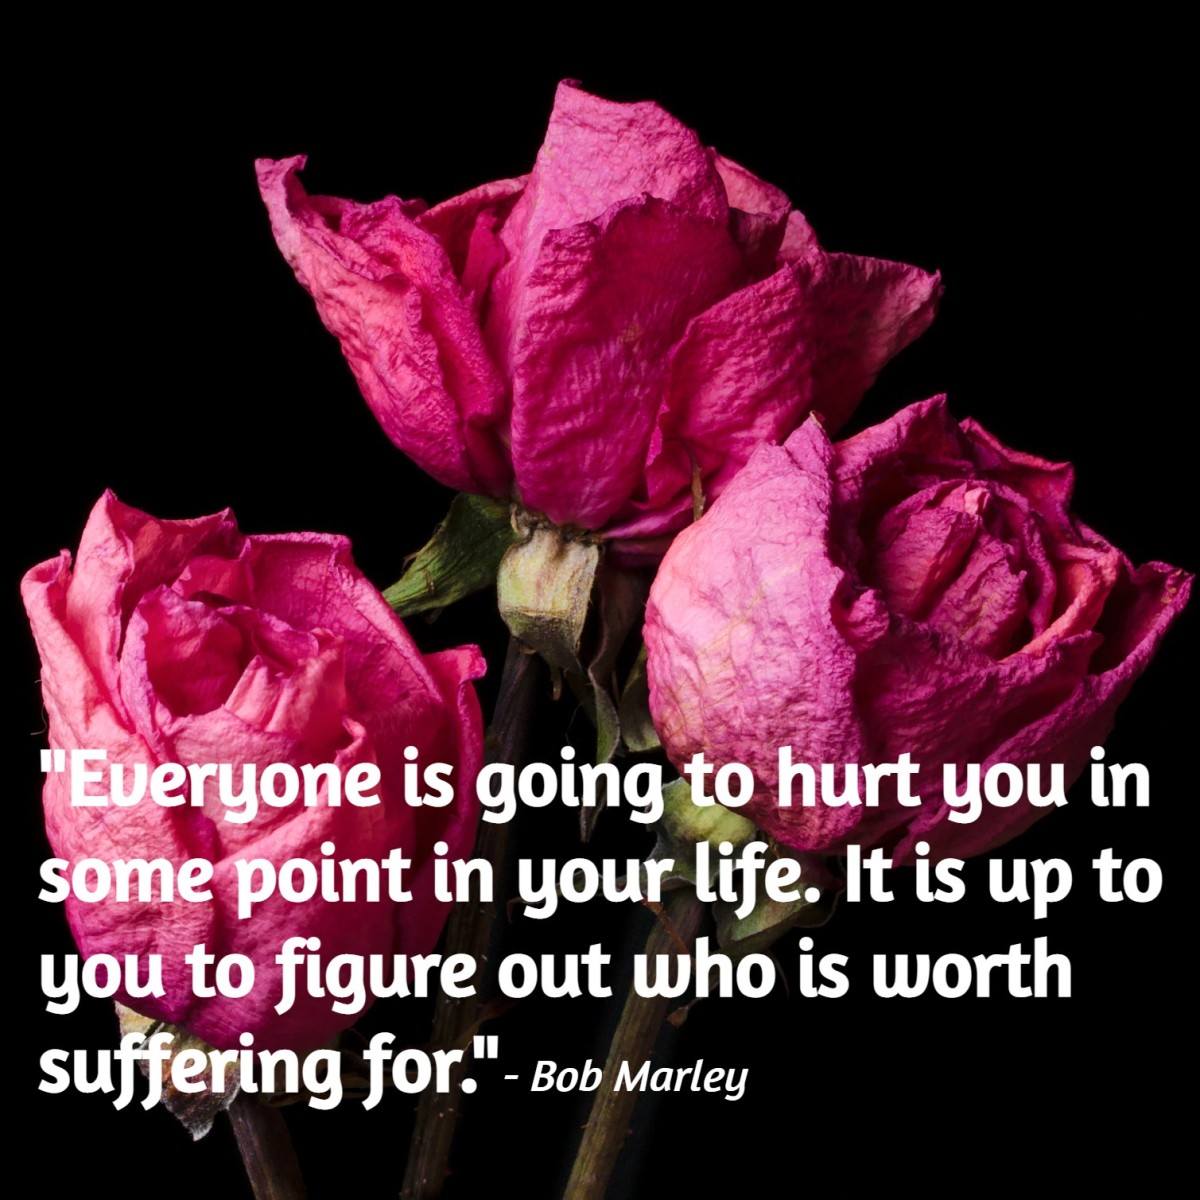 "Everyone is going to hurt you in some point in your life. It is up to you to figure out who is worth suffering for." - Bob Marley, Jamaican mucician